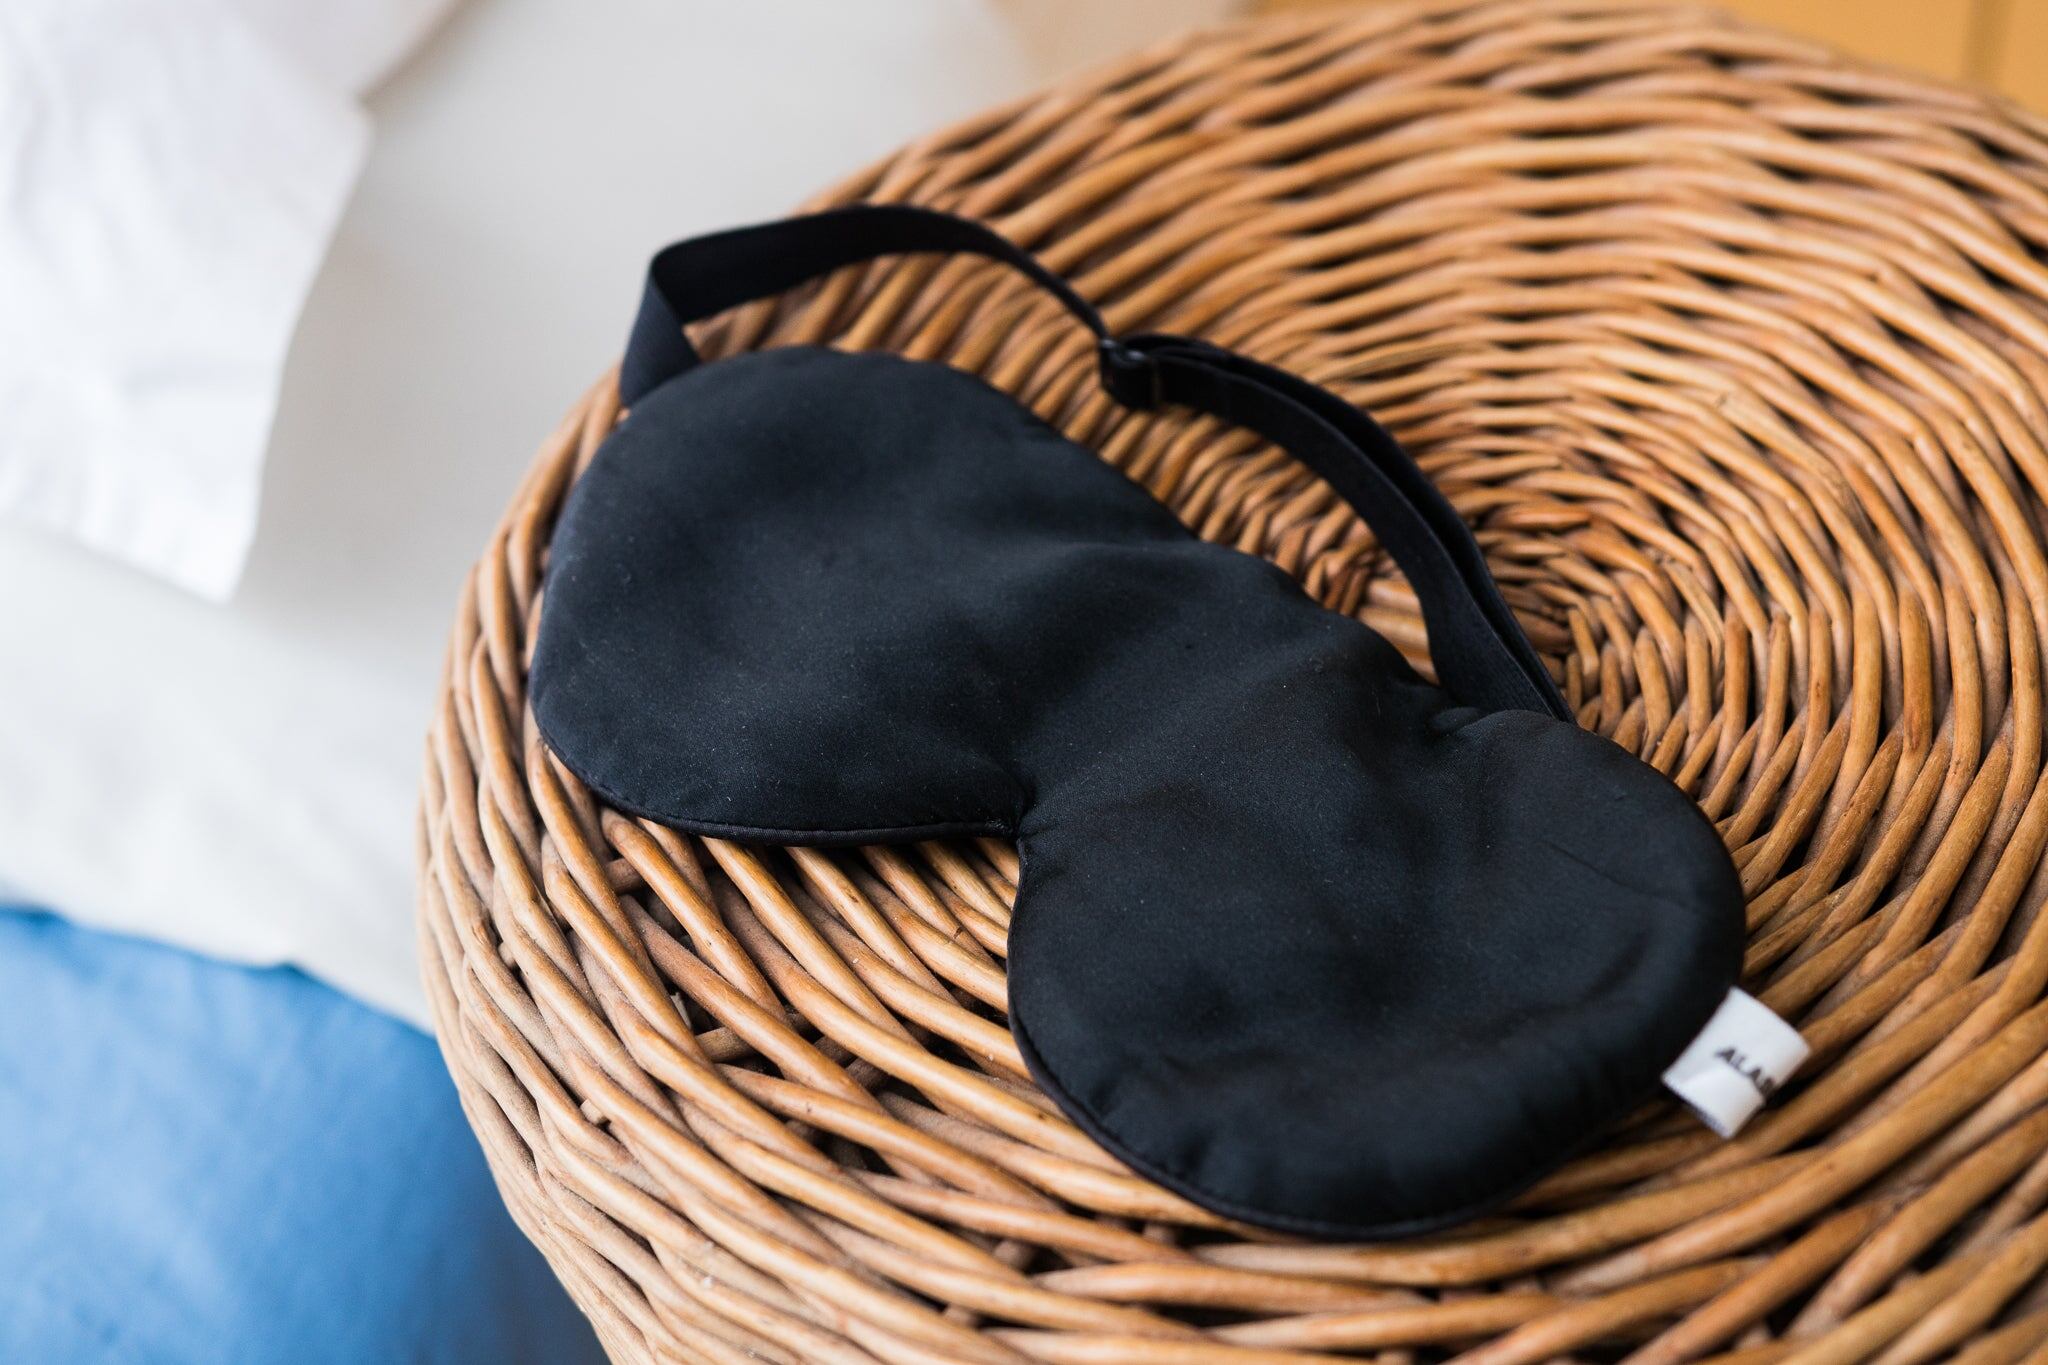 Sleep Mask Review: Enhance Your Sleep Quality with This Top-Rated Product